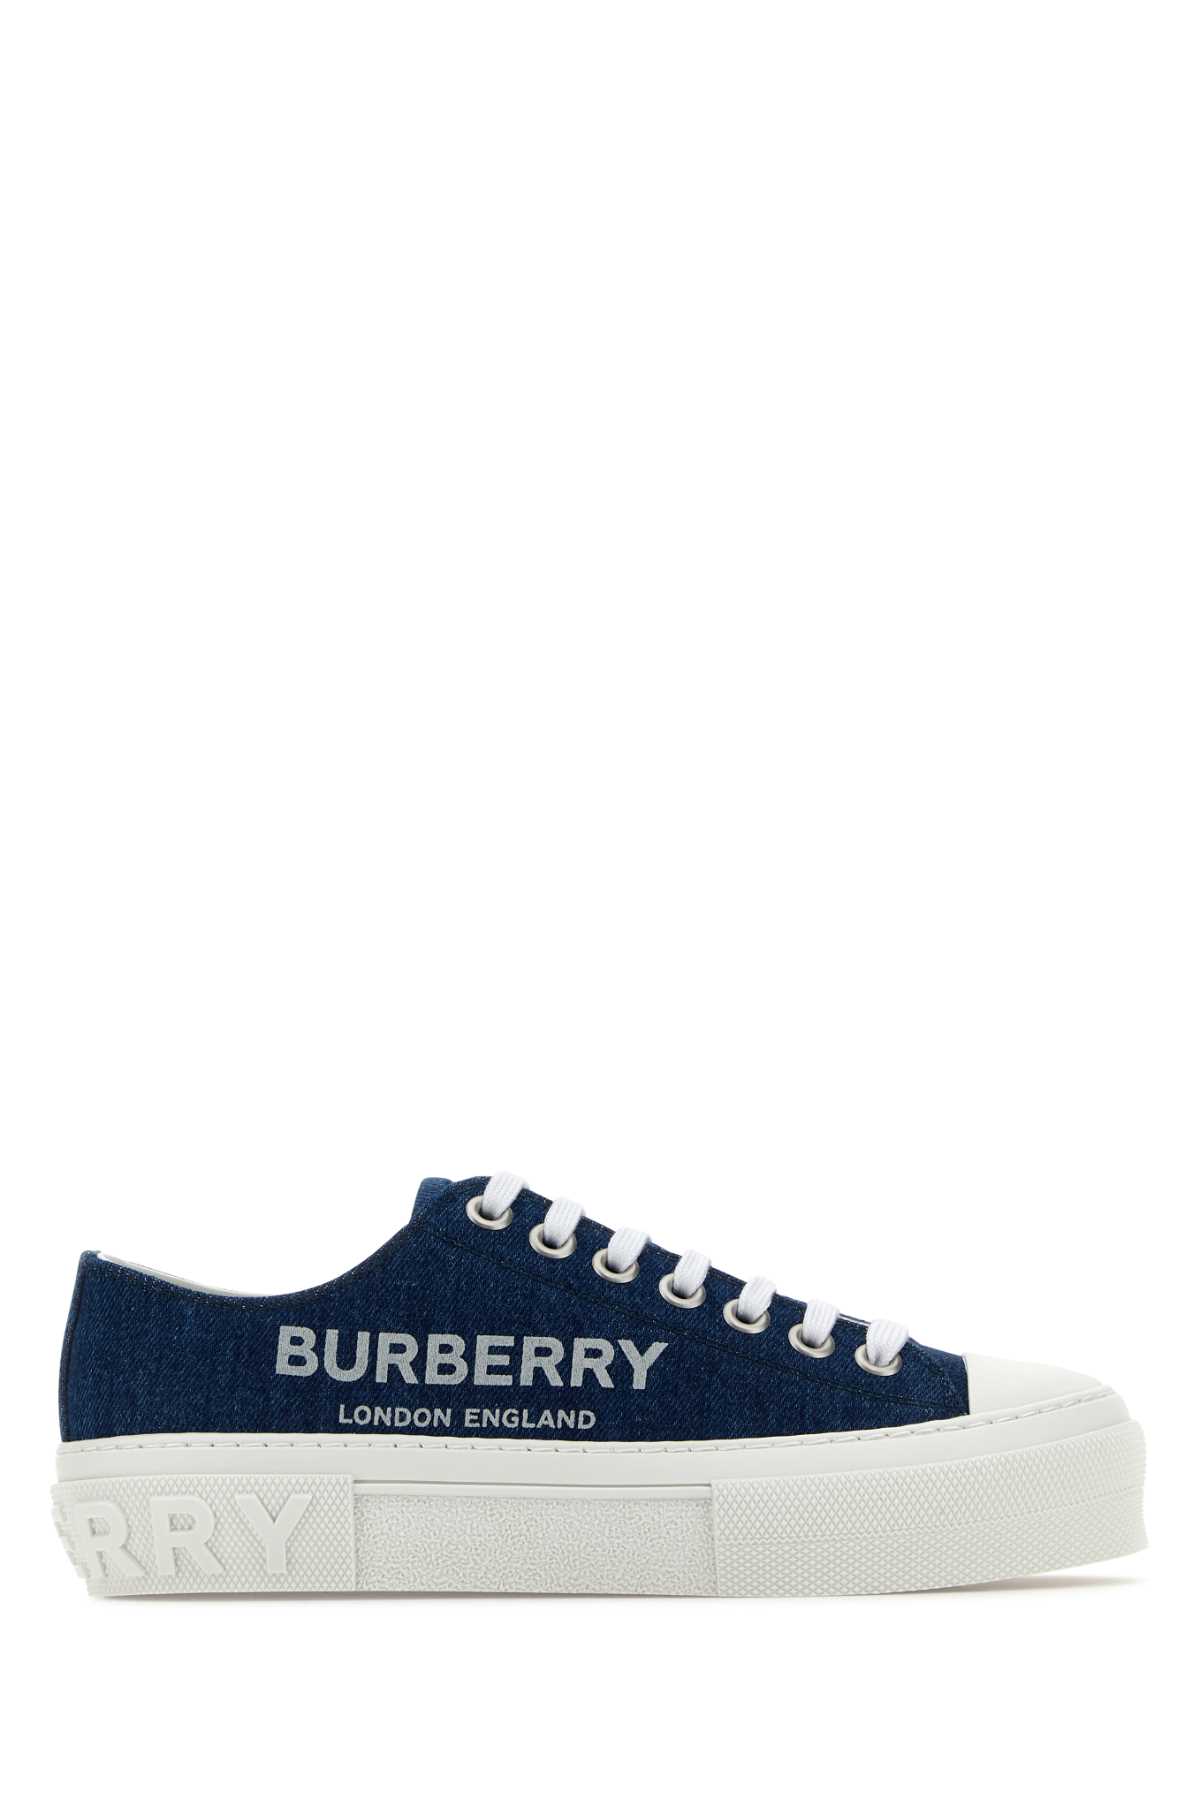 Burberry Demin Cotton Sneakers